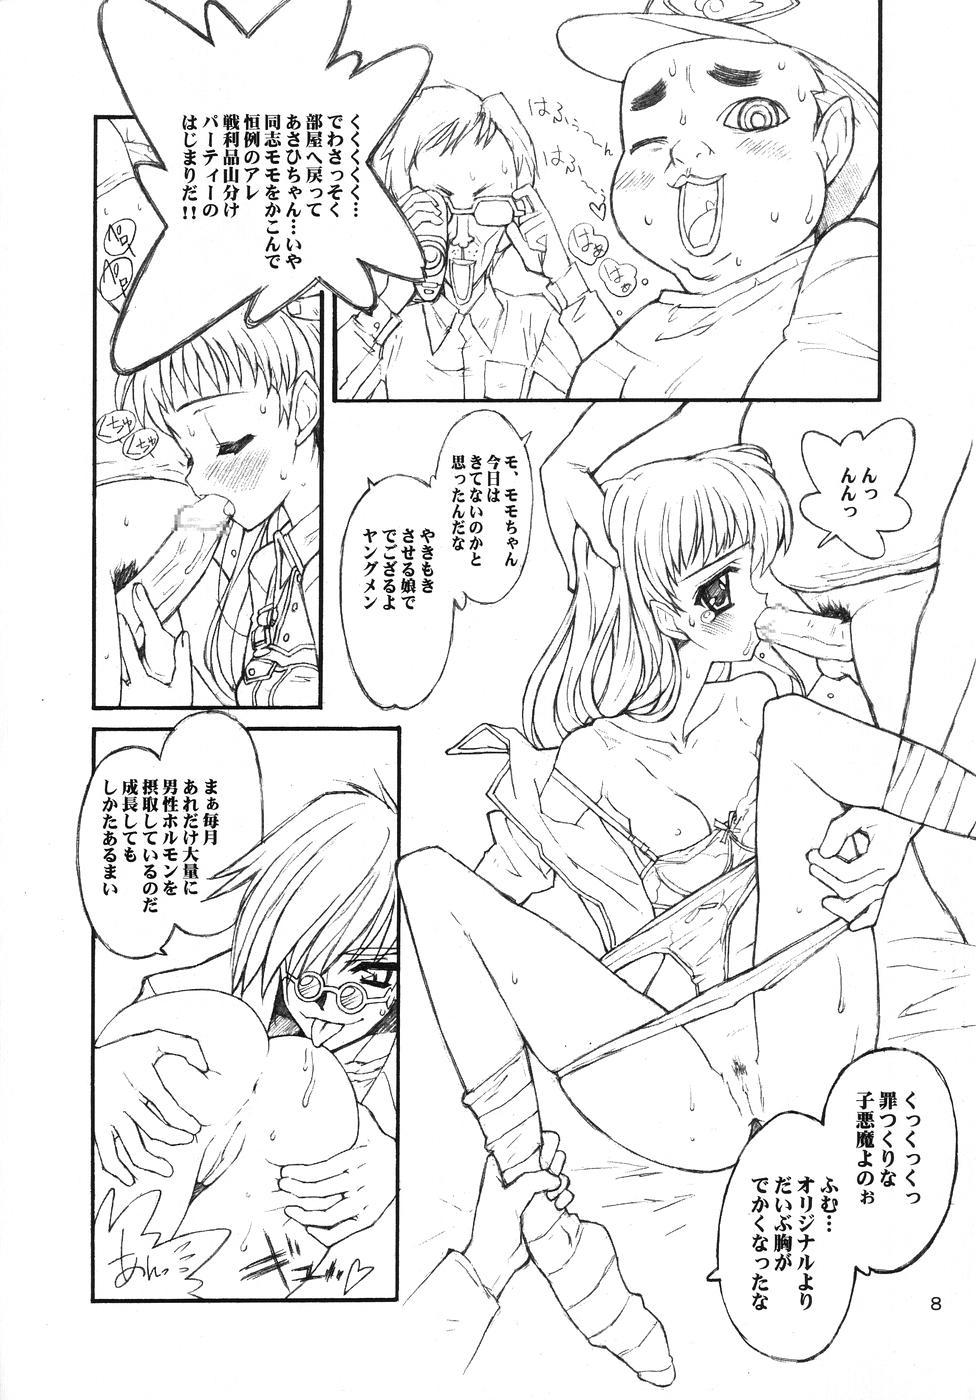 Polla Mistress Emi-chan's Ambition - Comic party Real Amature Porn - Page 7